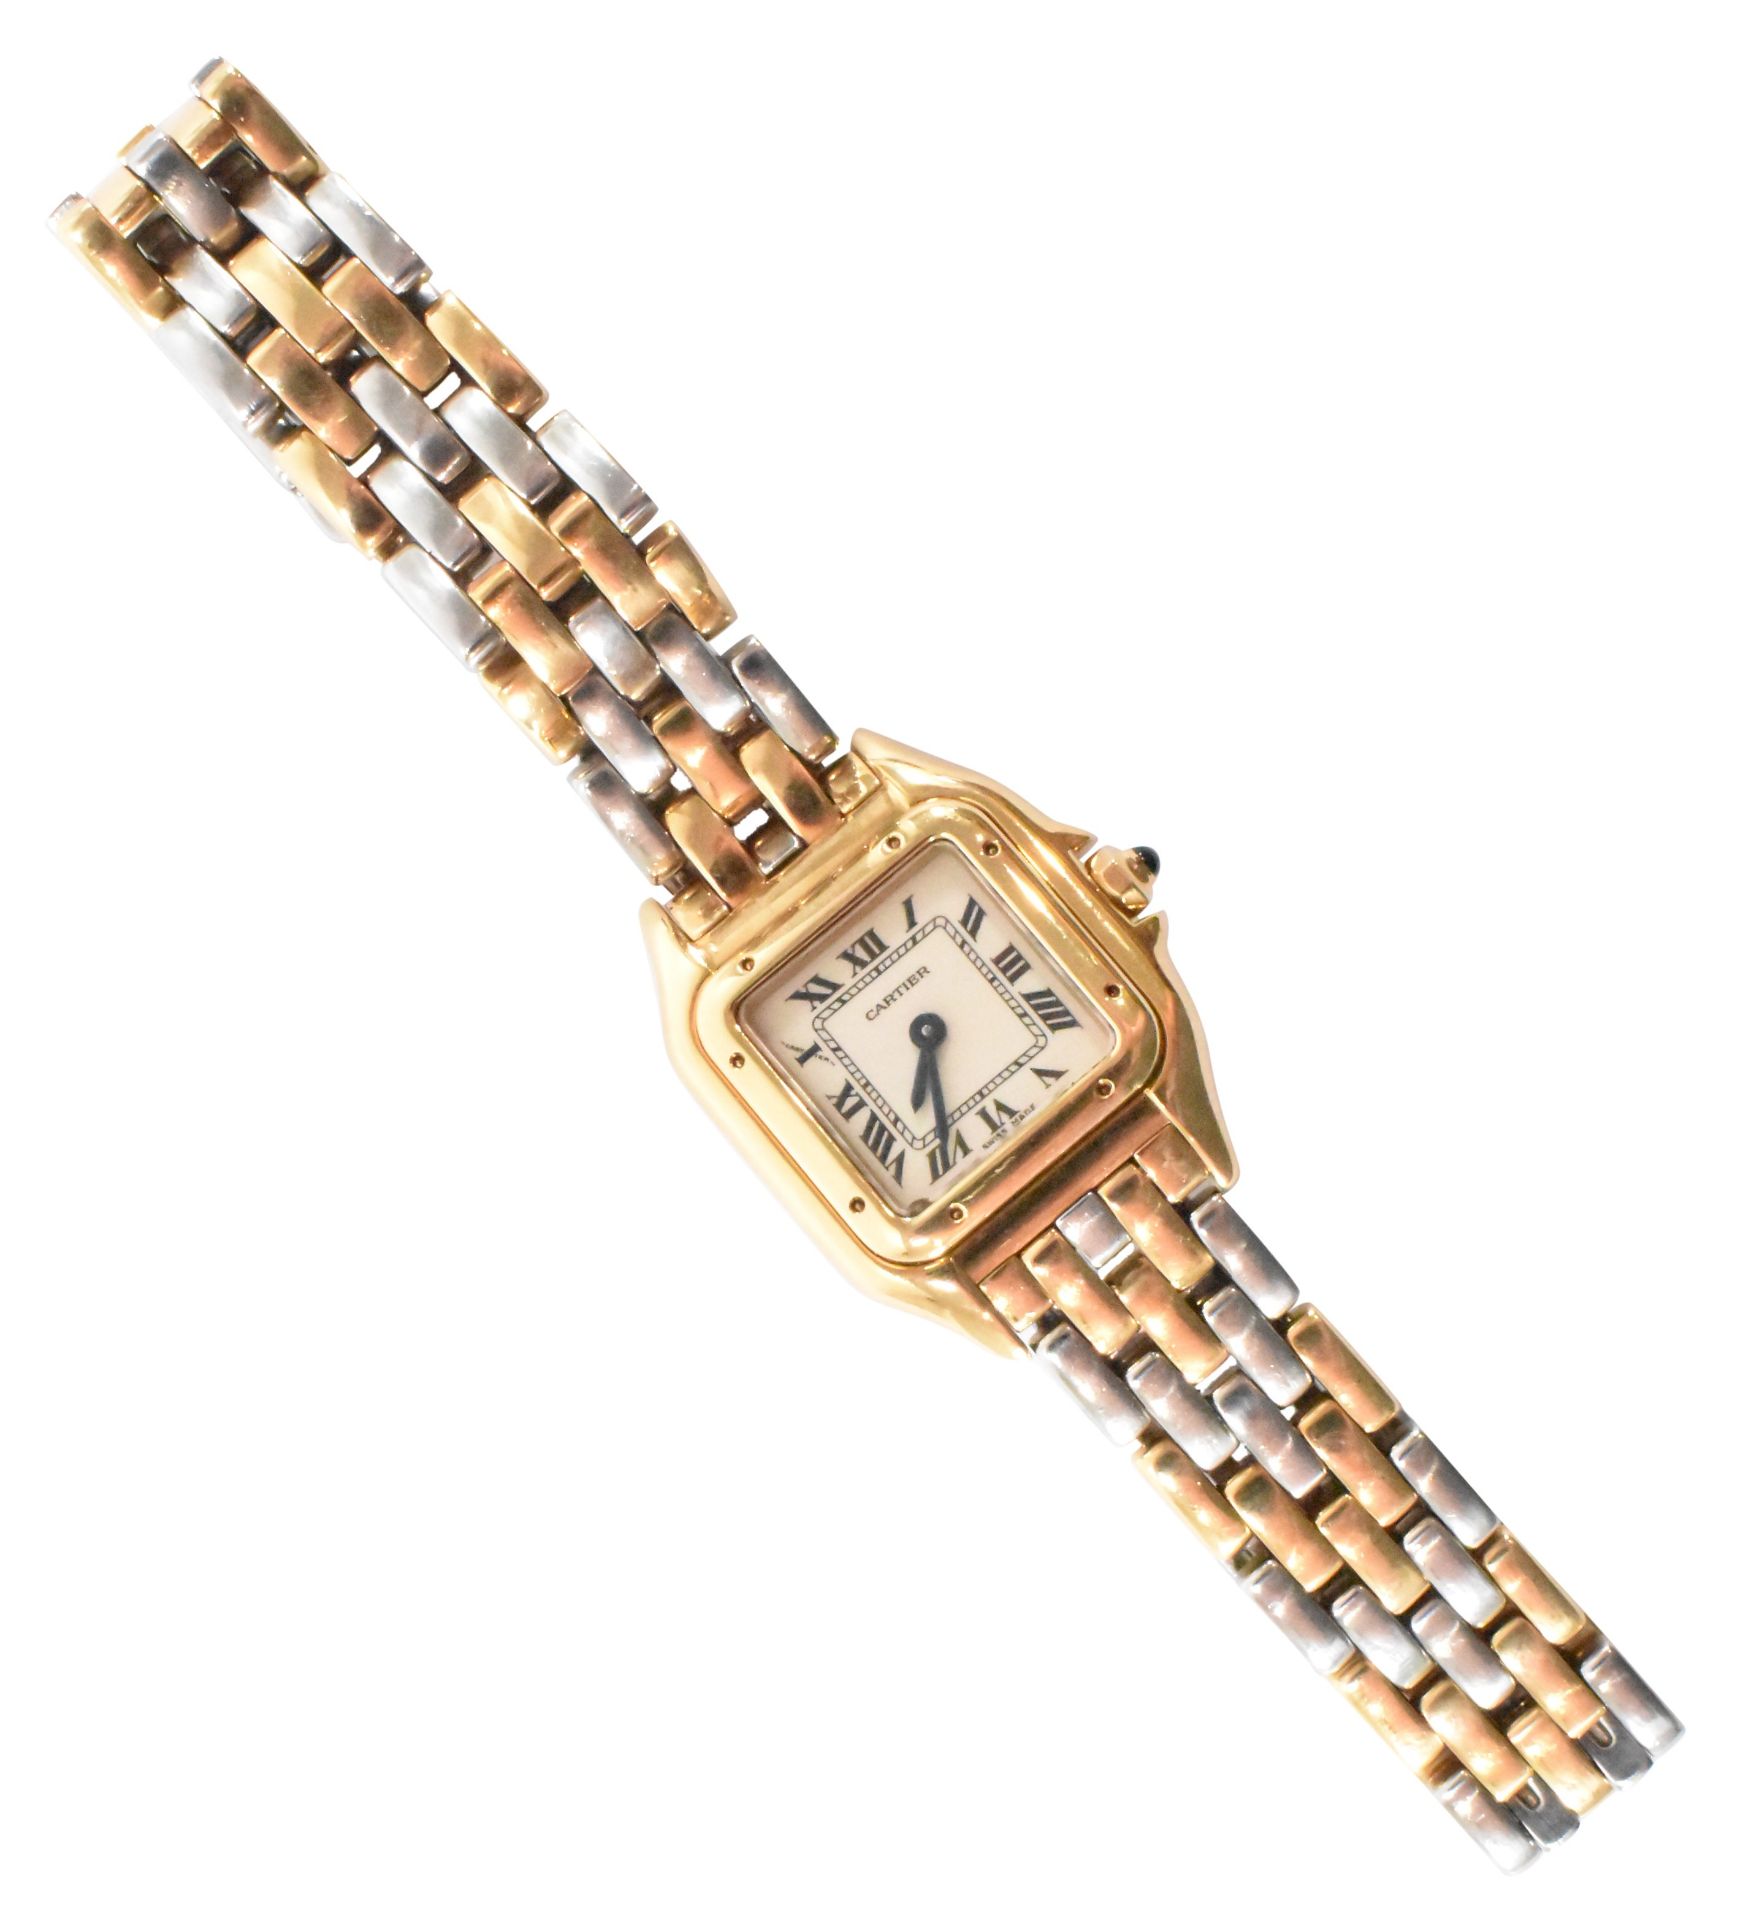 STEEL & GOLD CARTIER PANTHERE WRISTWATCH - Image 2 of 6